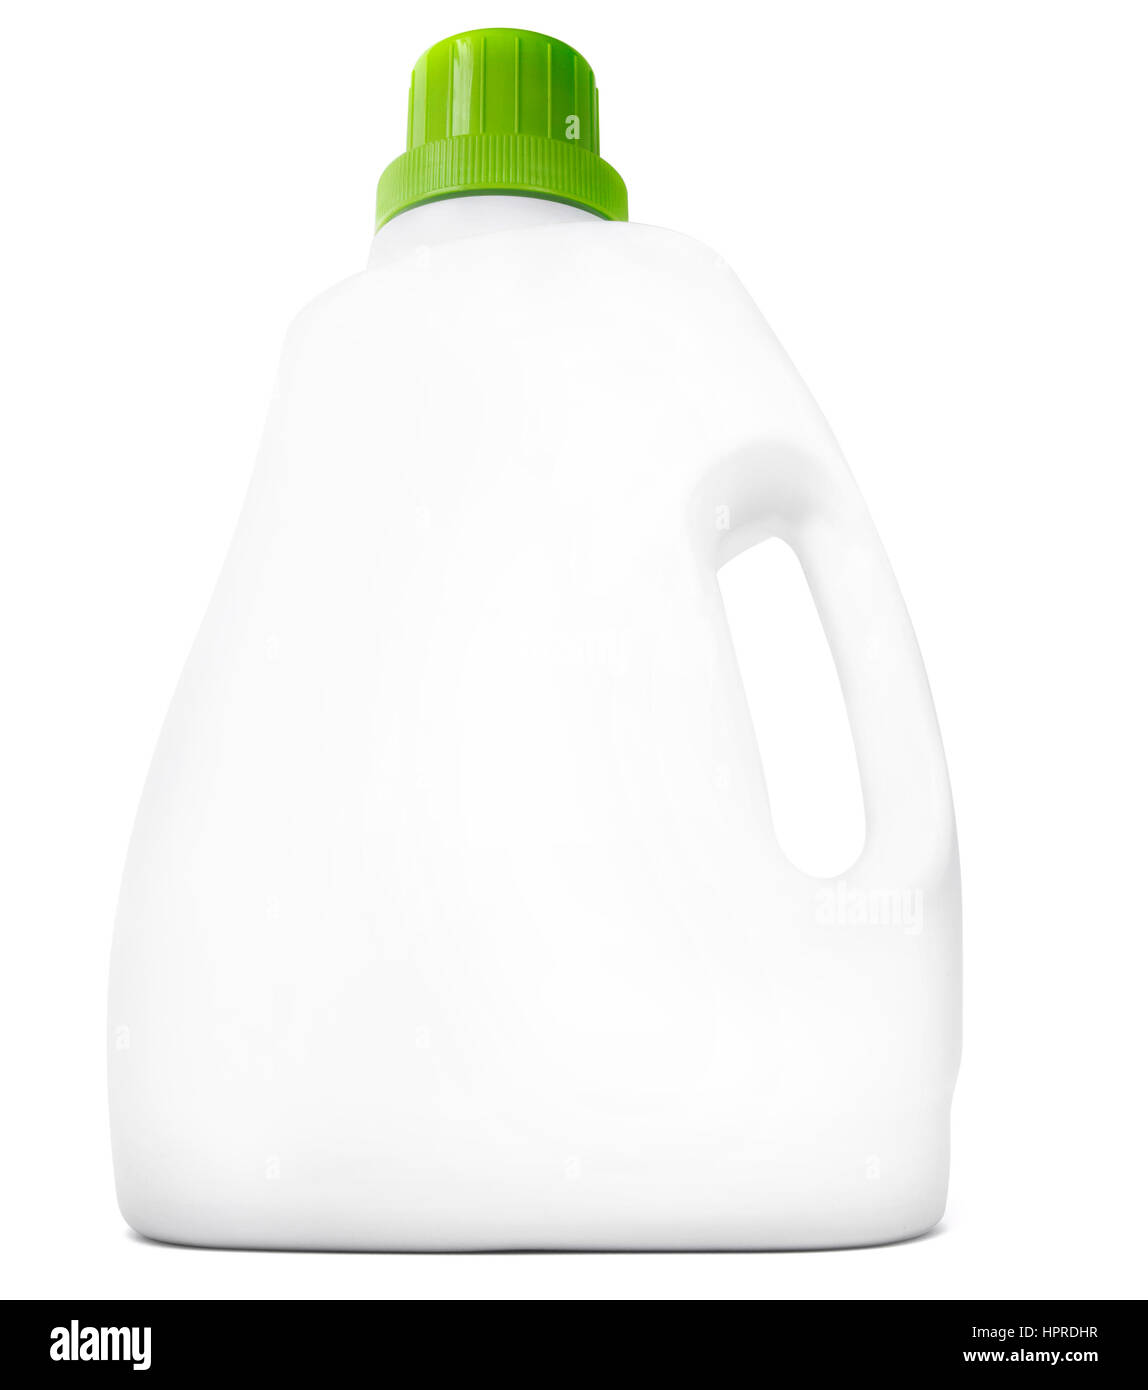 Blank detergent bottle. Isolated detergent bottle on a white background. Stock Photo